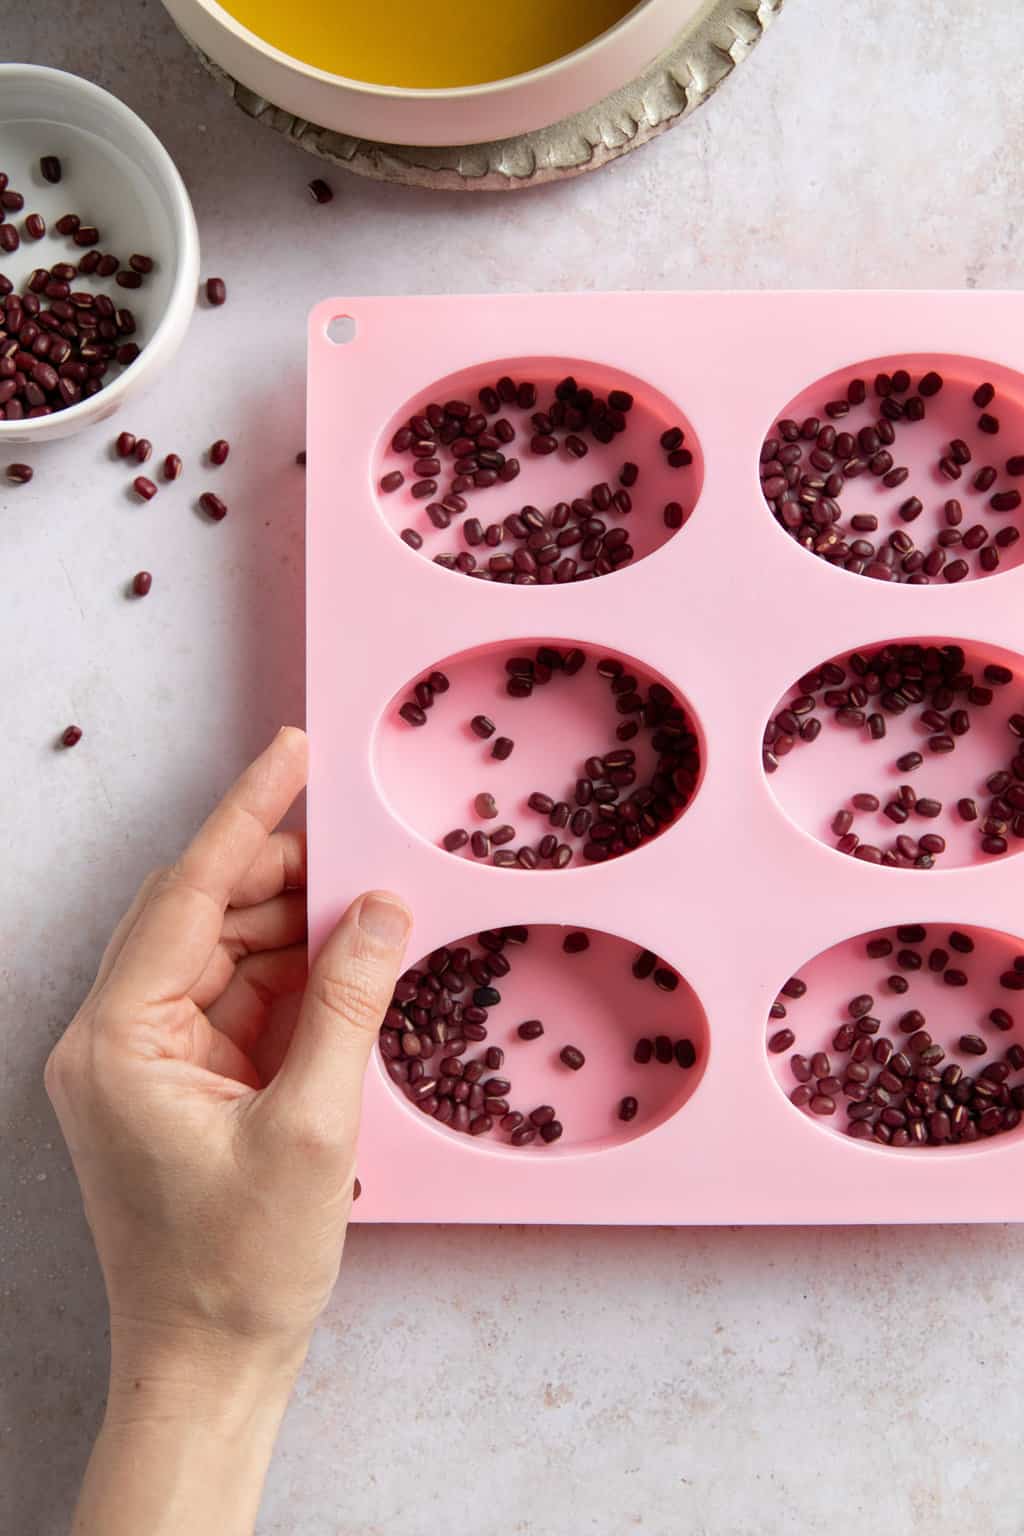 Place the beans in the mold for Lush copycat massage bars